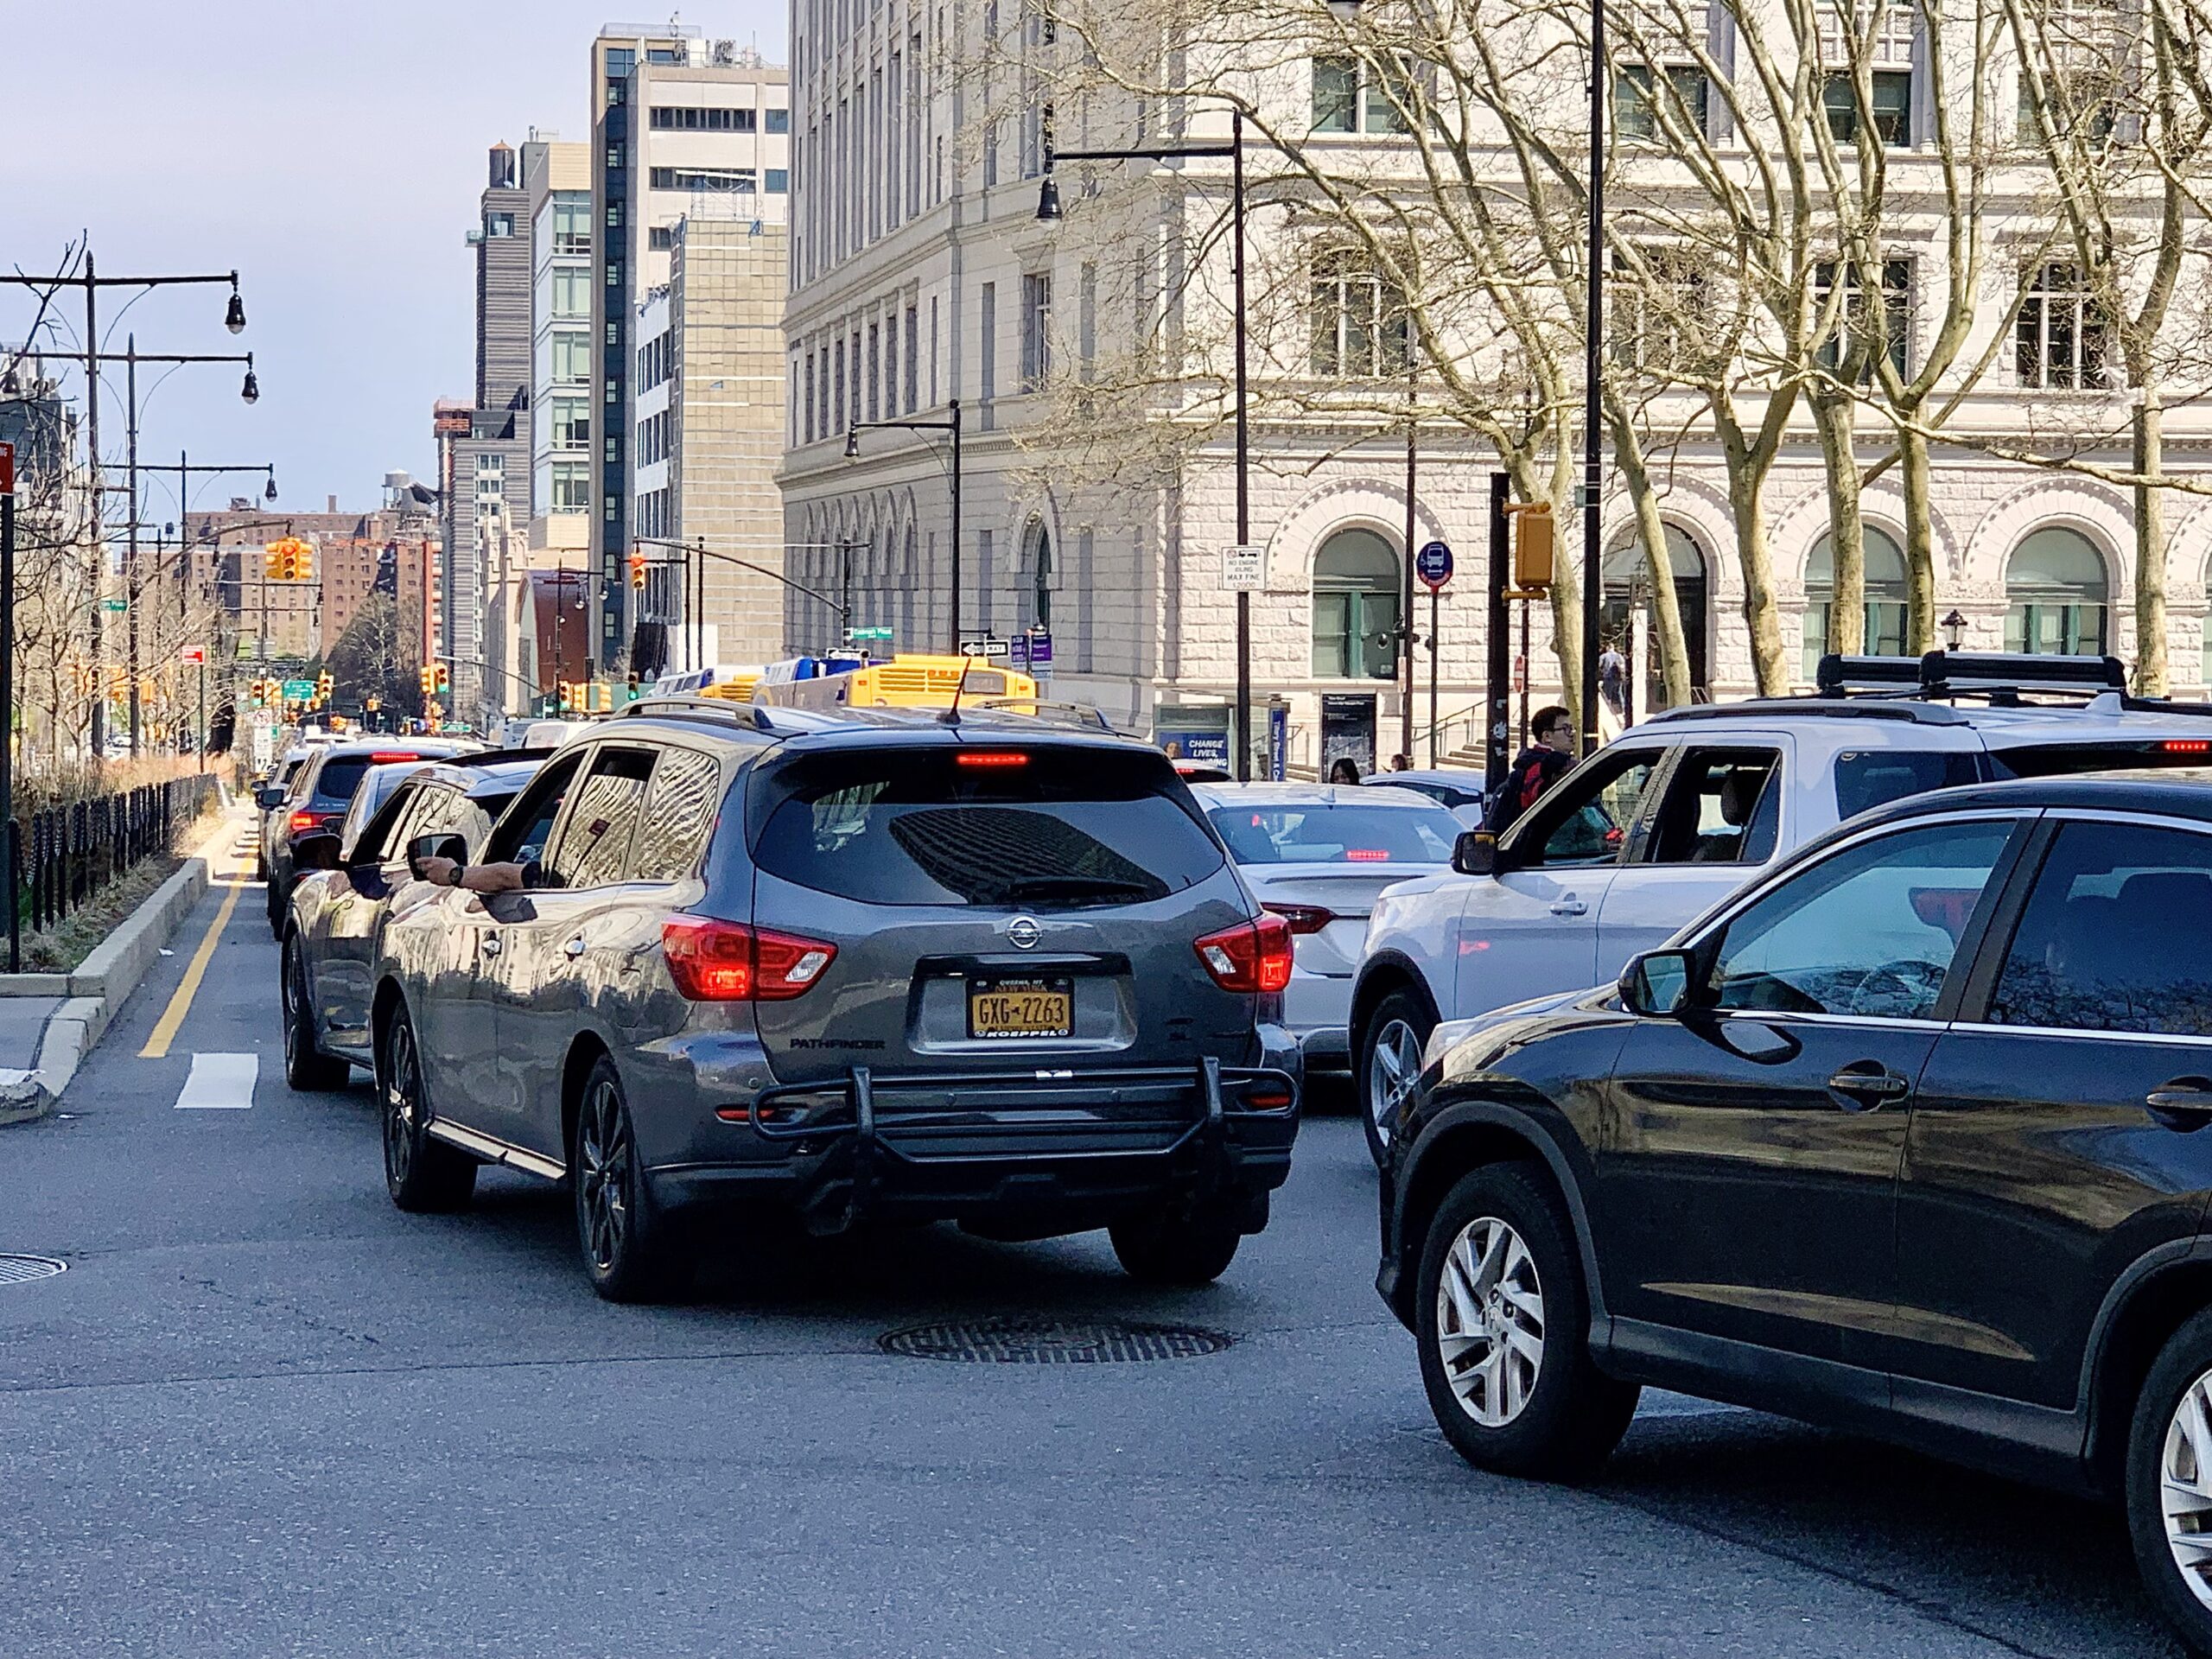 Traffic pileup of vehicles diverted off the BQE, at the intersection of Cadman Plaza West and Tillary Street on Sunday.